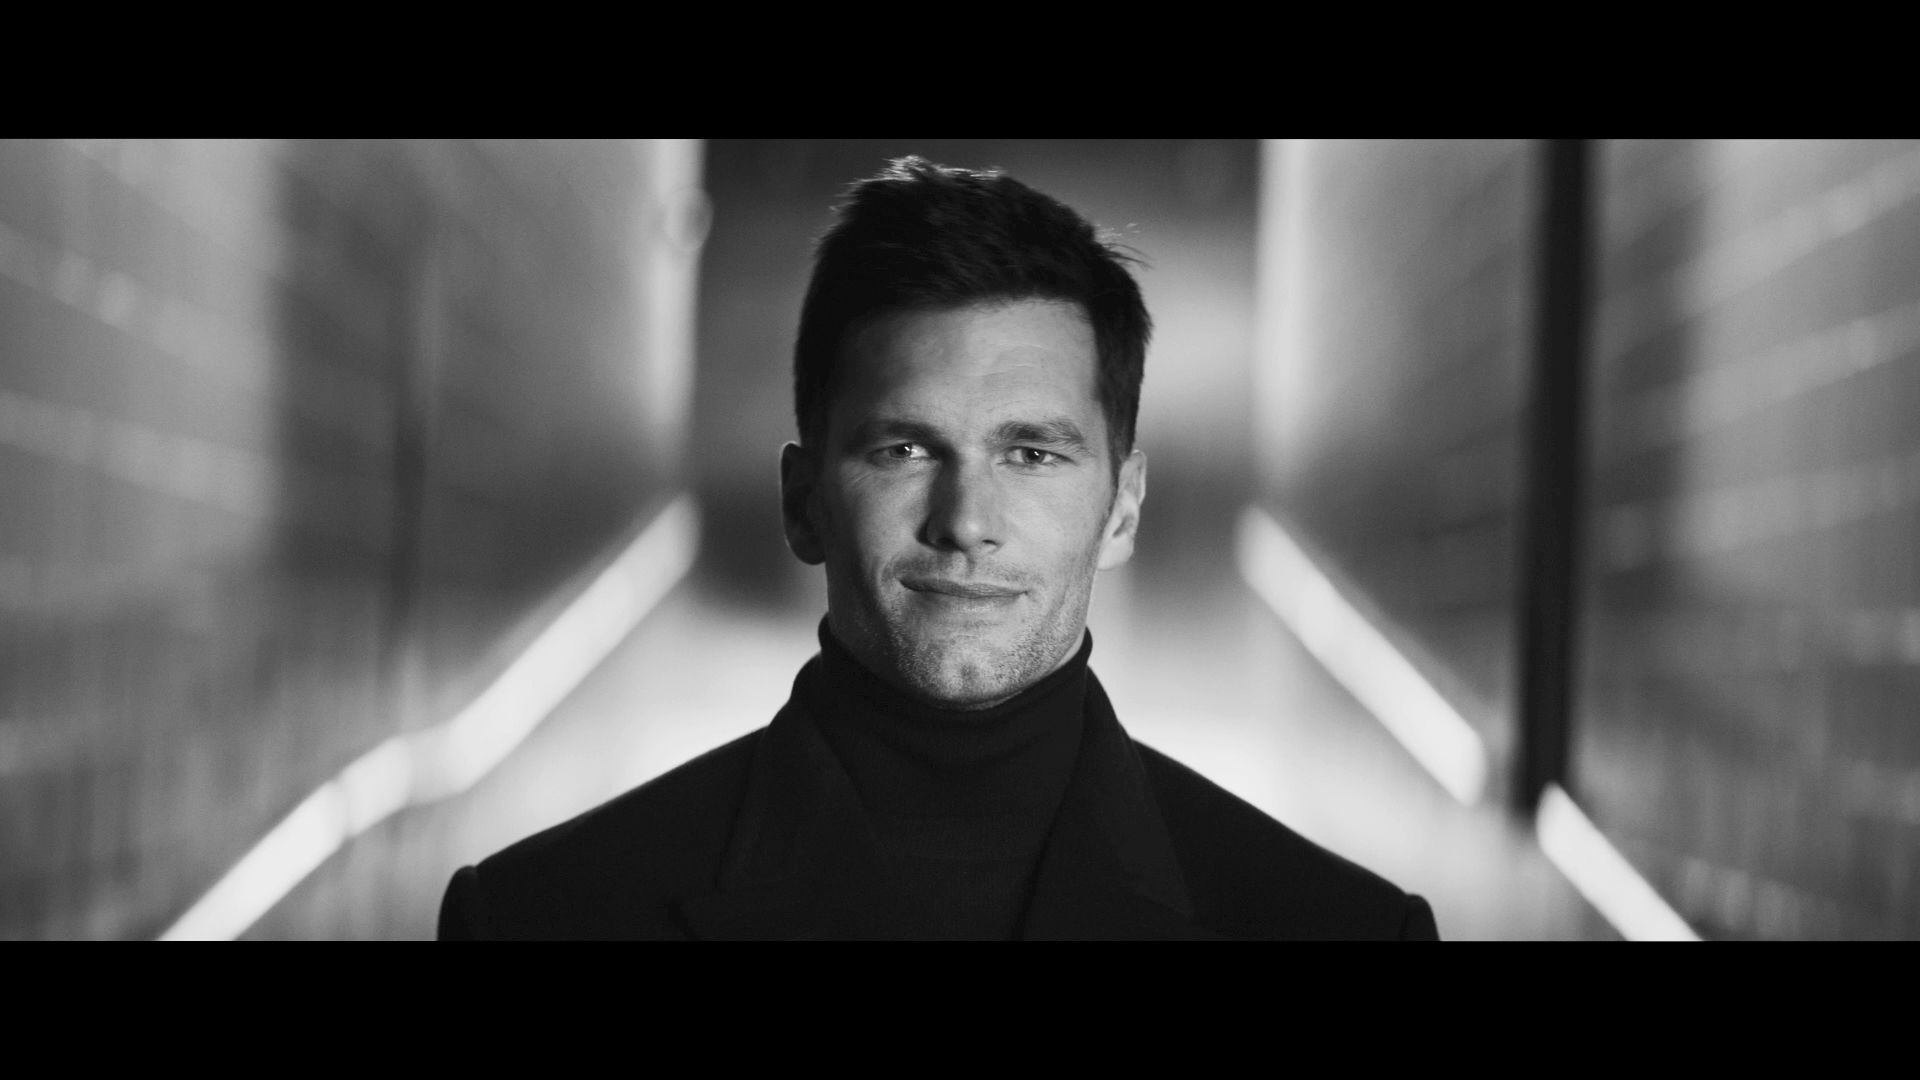 Tom Brady in the Super Bowl commercial